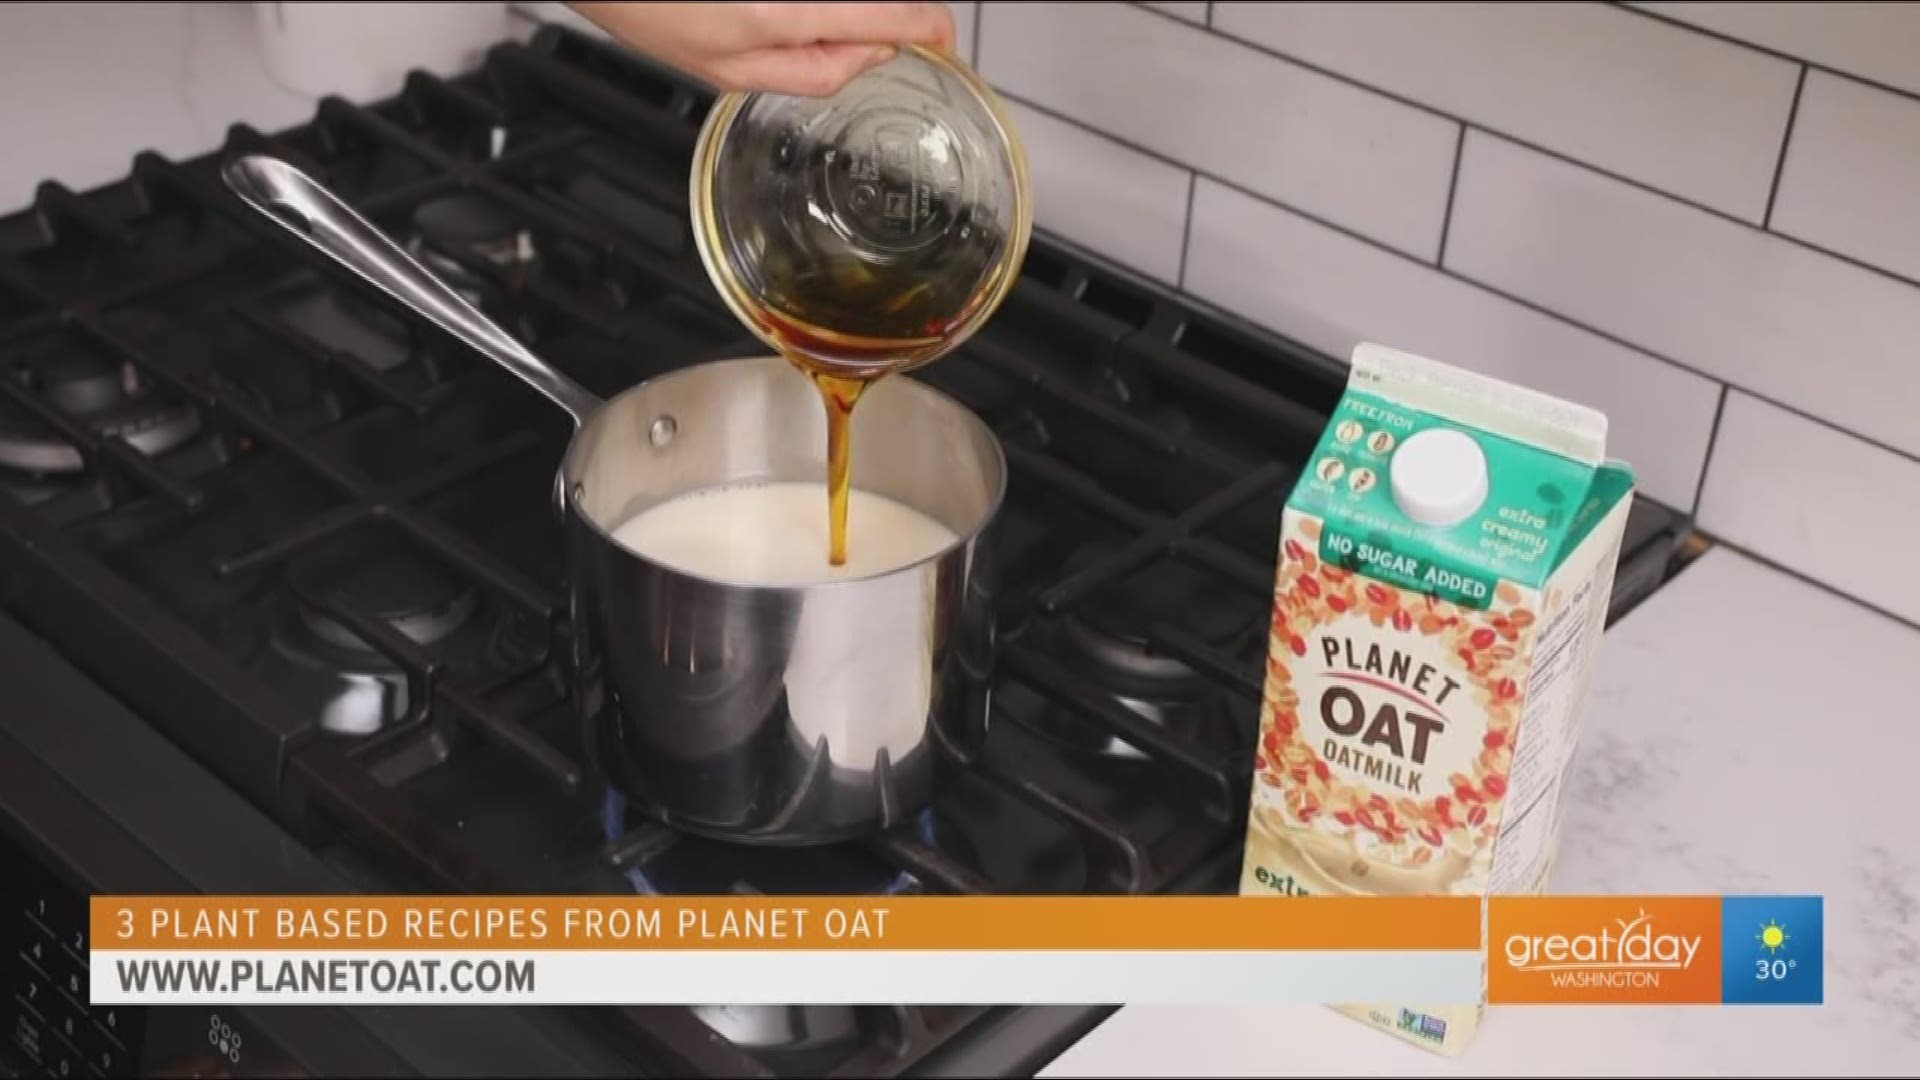 Limor Suss is here to help you make some delicious plant-based dishes! This segment was sponsored by LS Media.